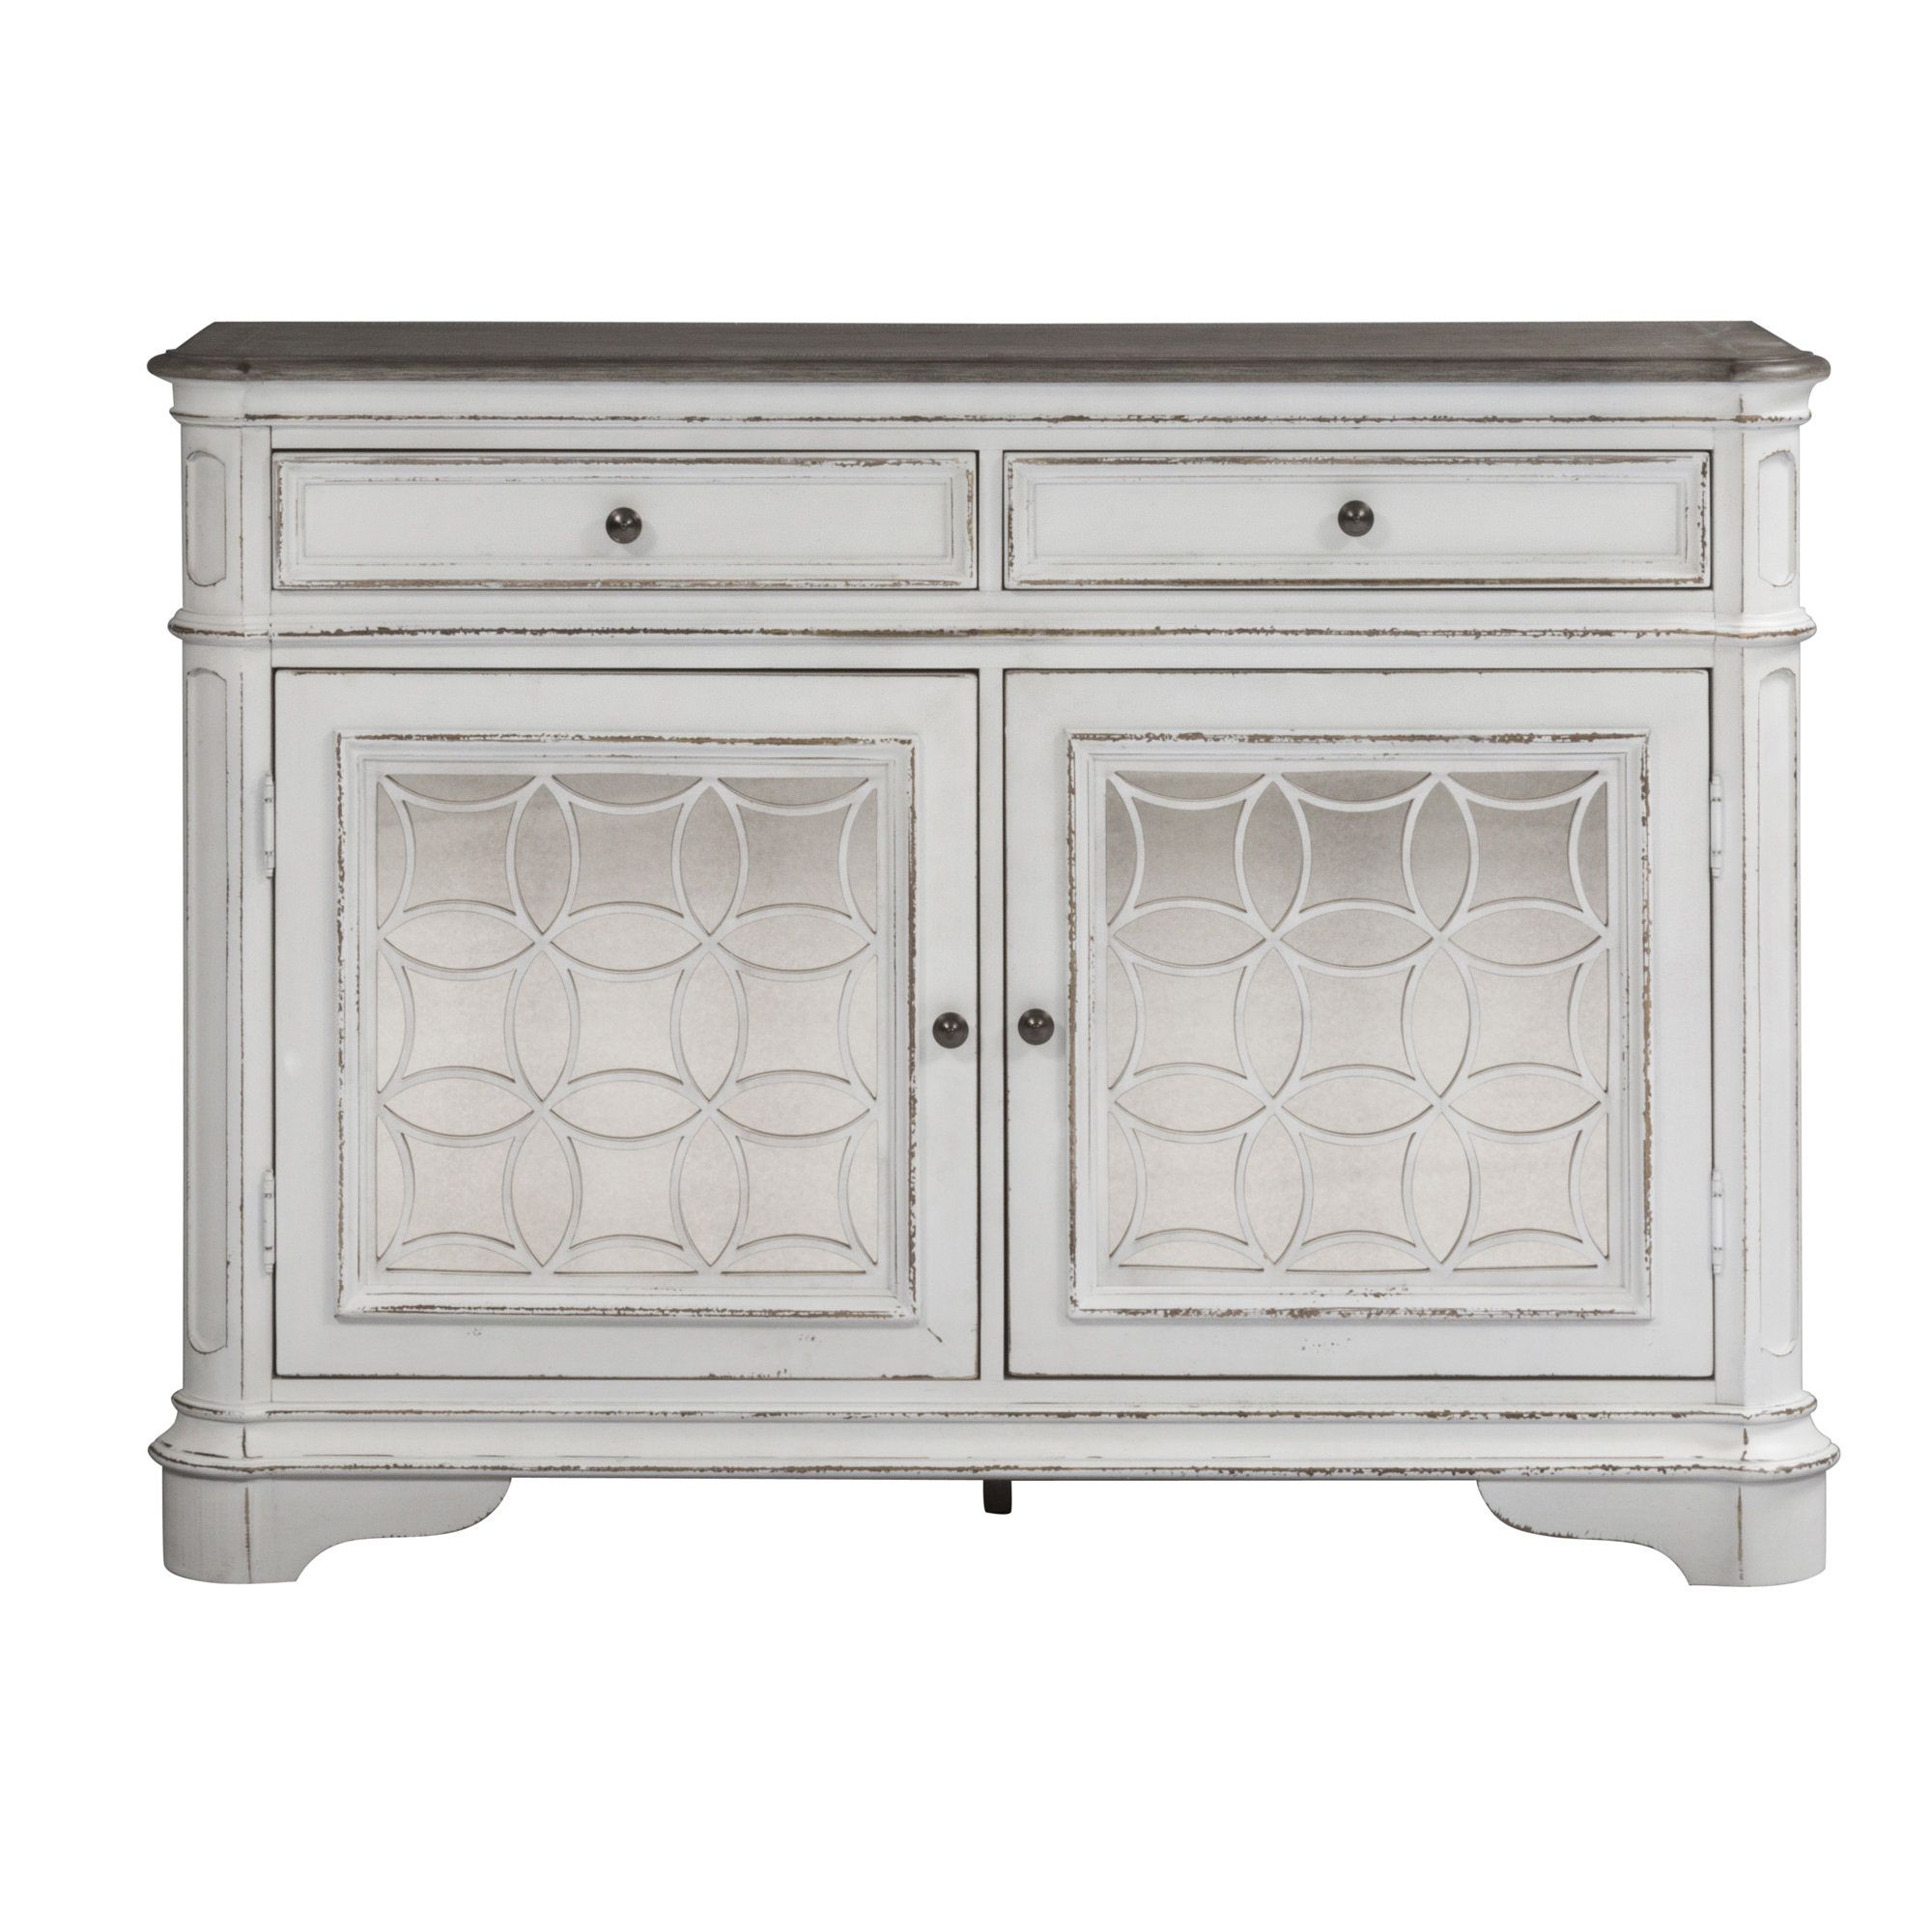 Lark Manor Tiphaine Sideboard For Most Recently Released Tiphaine Sideboards (View 5 of 20)